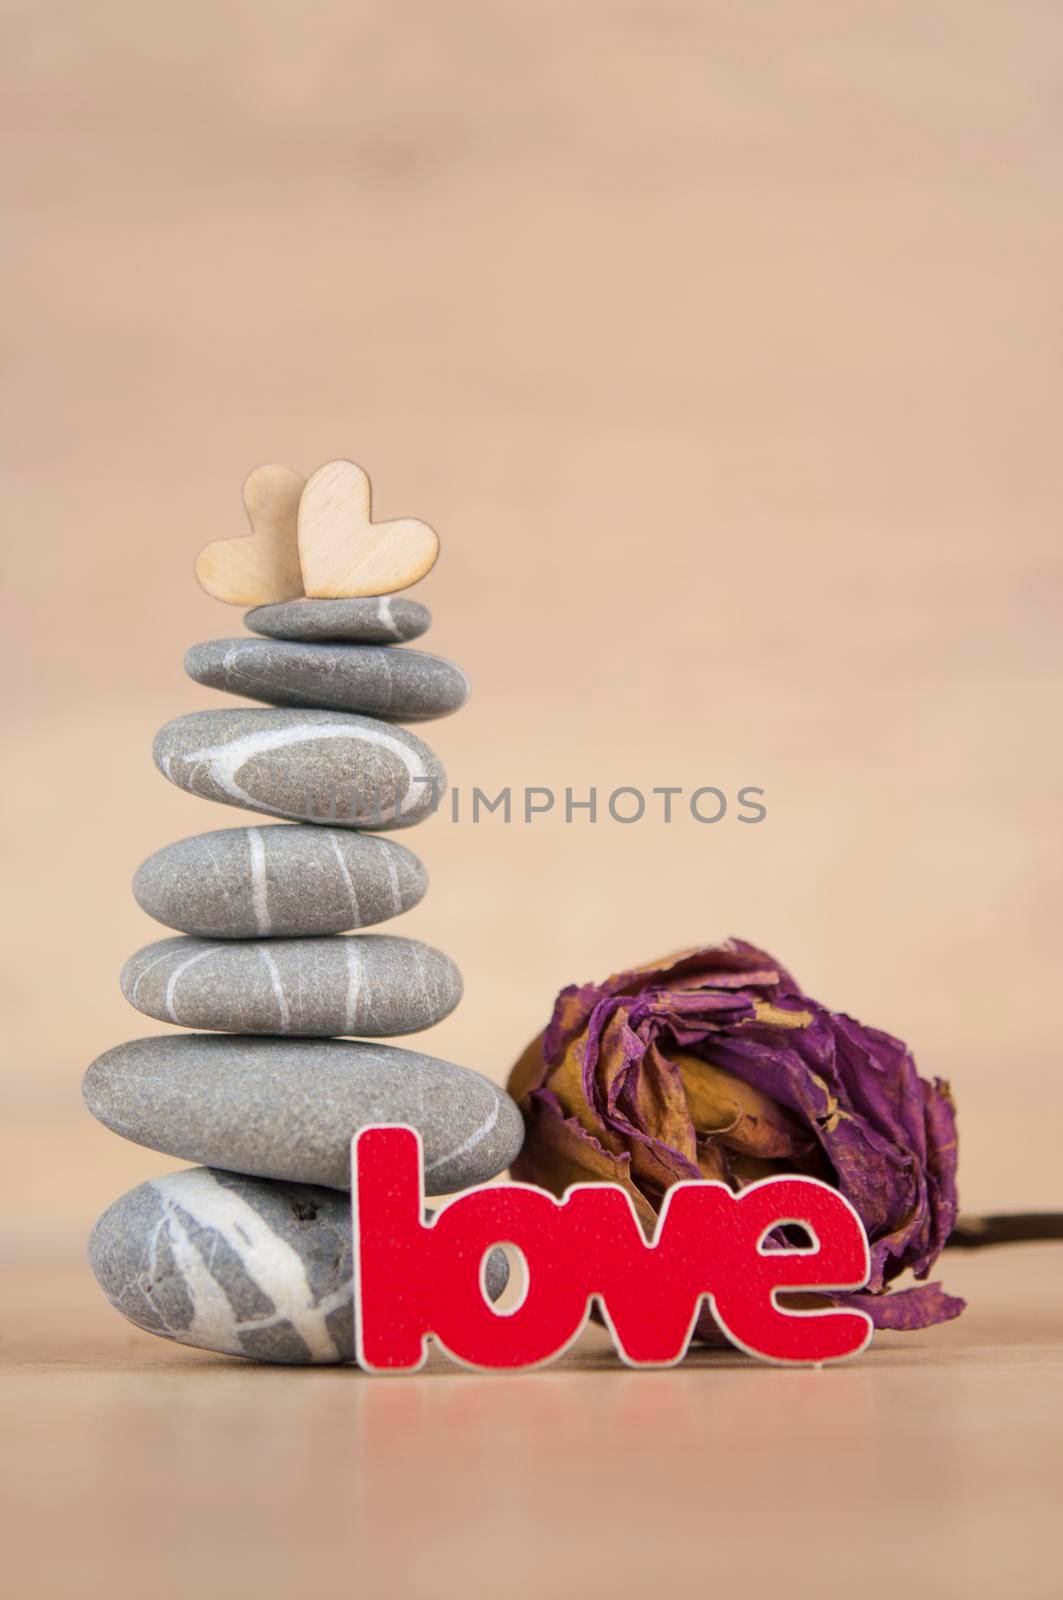 Stone cairn on wood background, simple poise stones, simplicity harmony and balance, rock zen sculptures by inxti